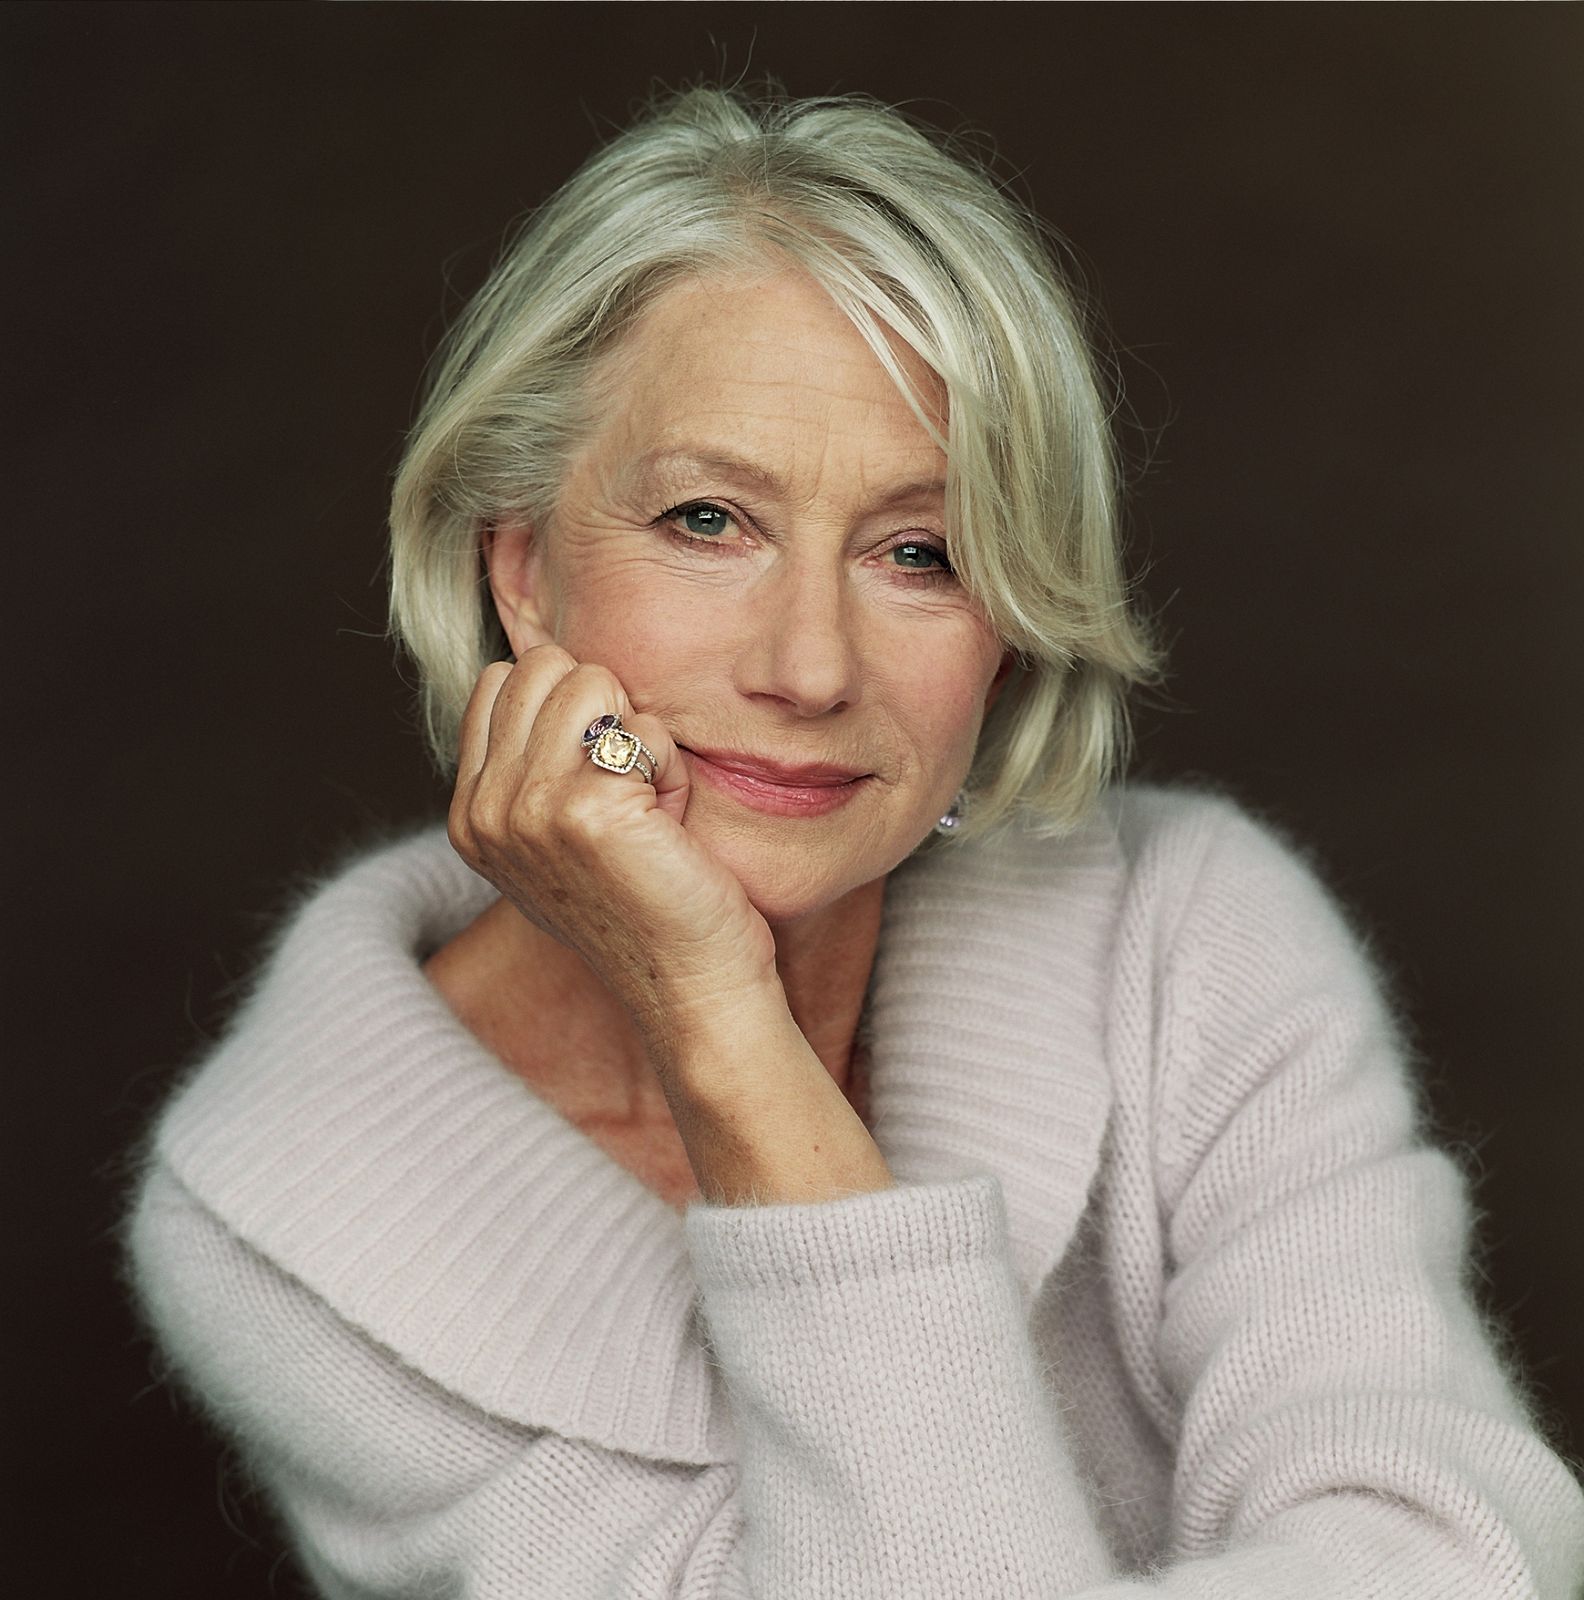 Helen Mirren Didn’t Smile, Thought She’ll Look Stupid